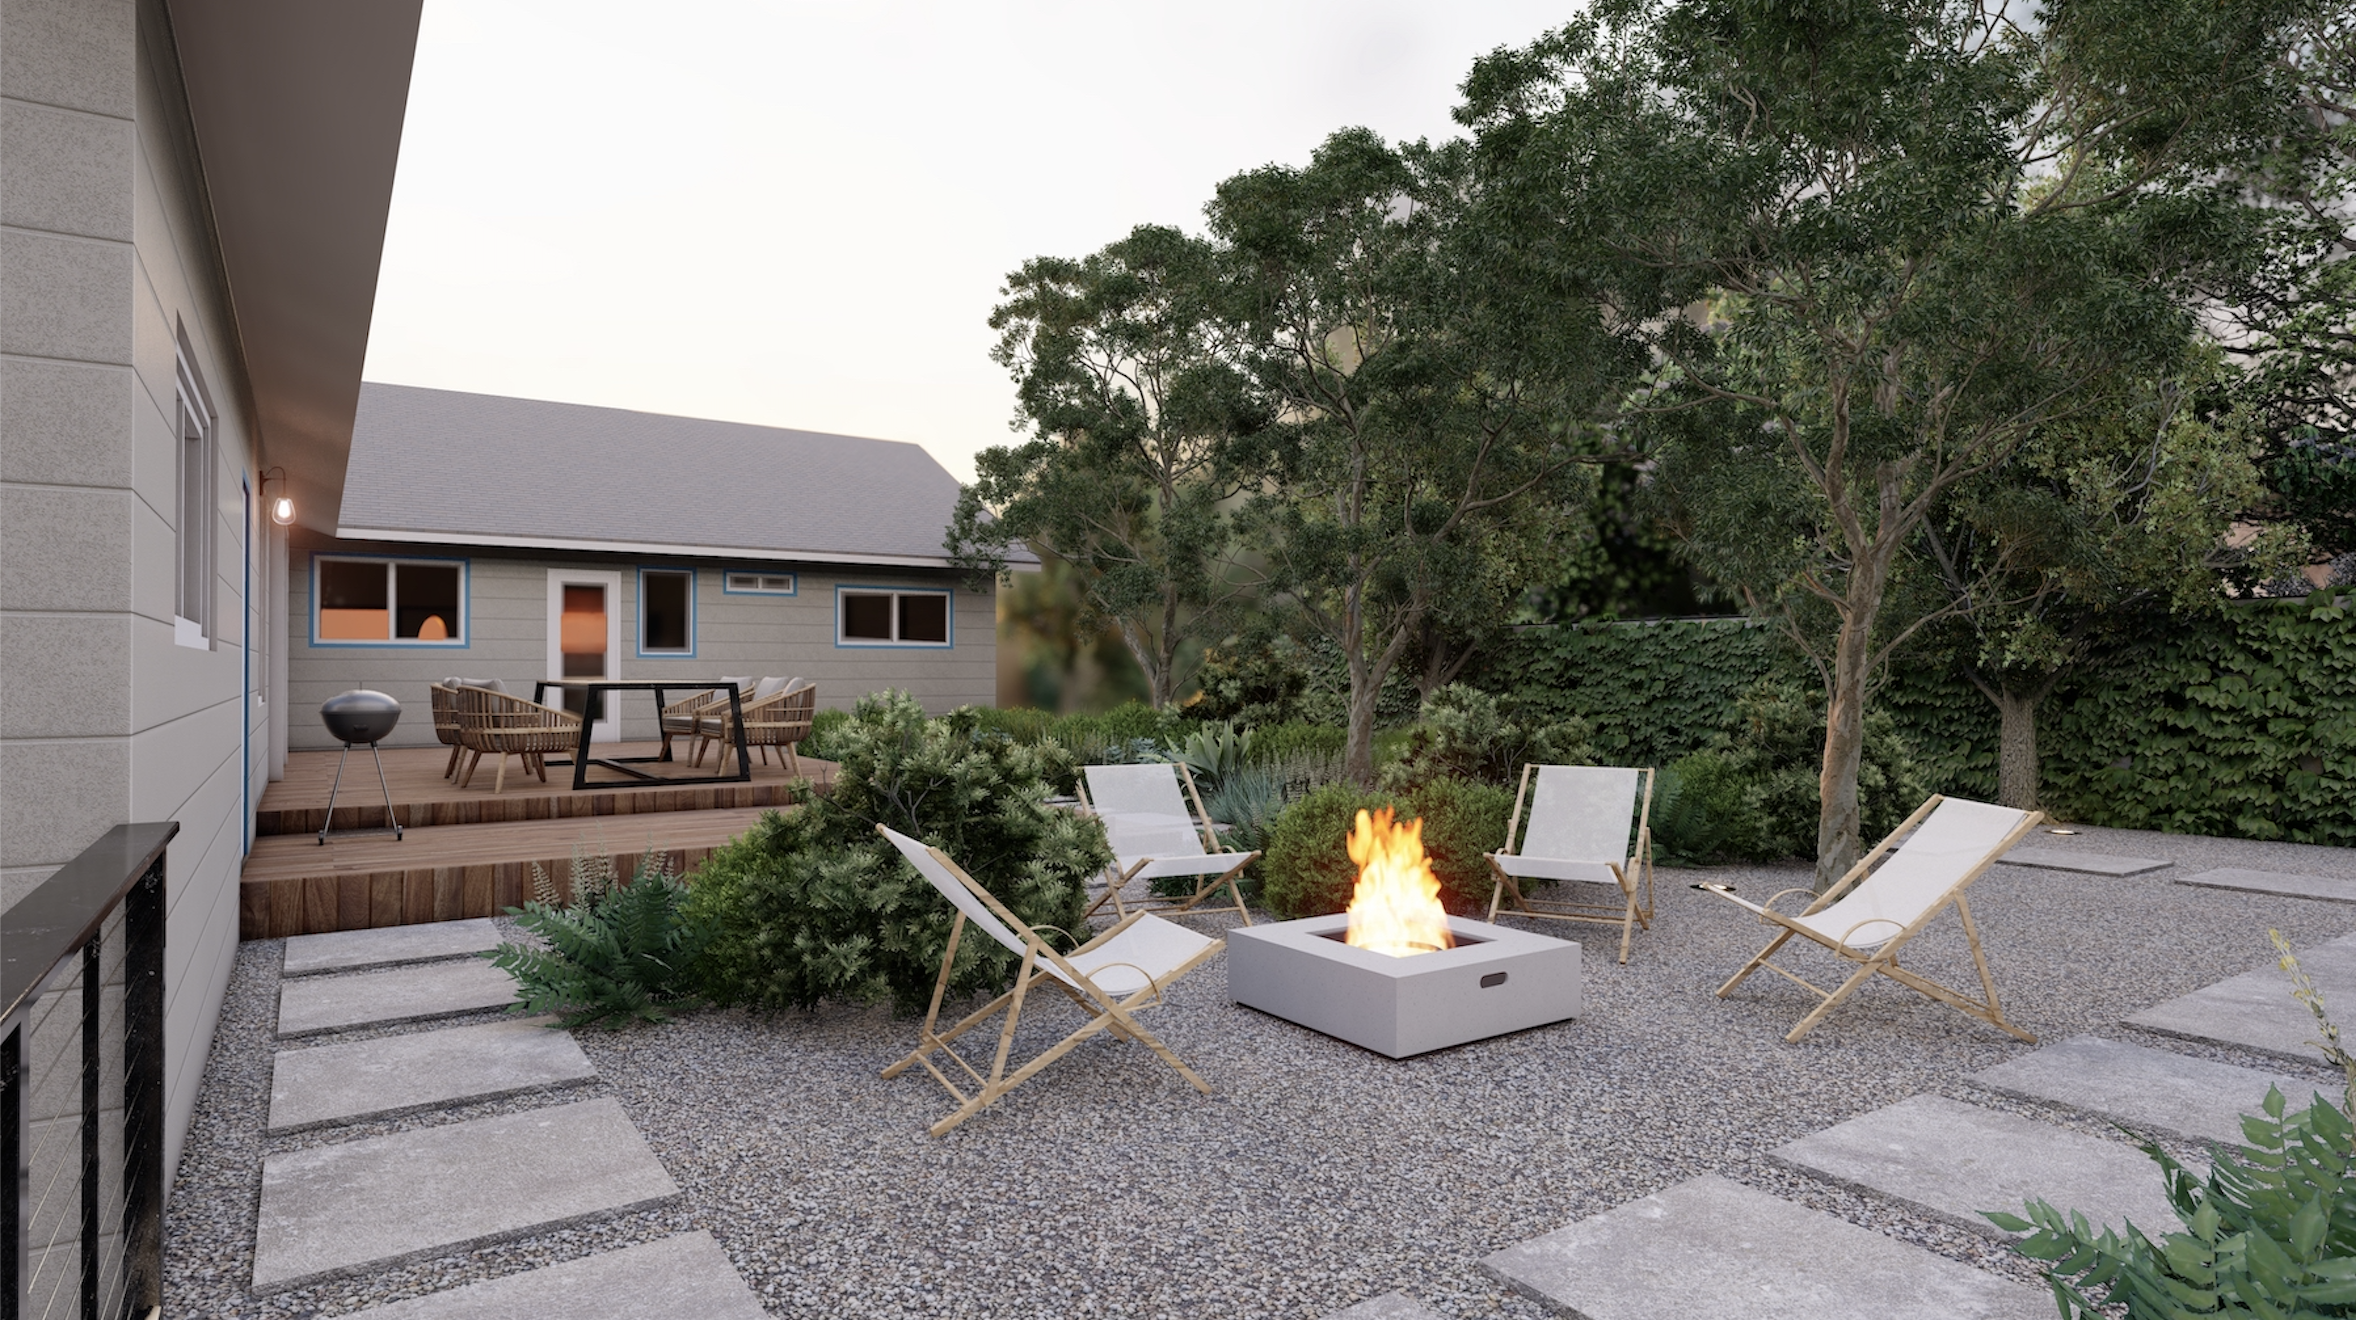 Casual fire pit area on gravel with square stone fire pit